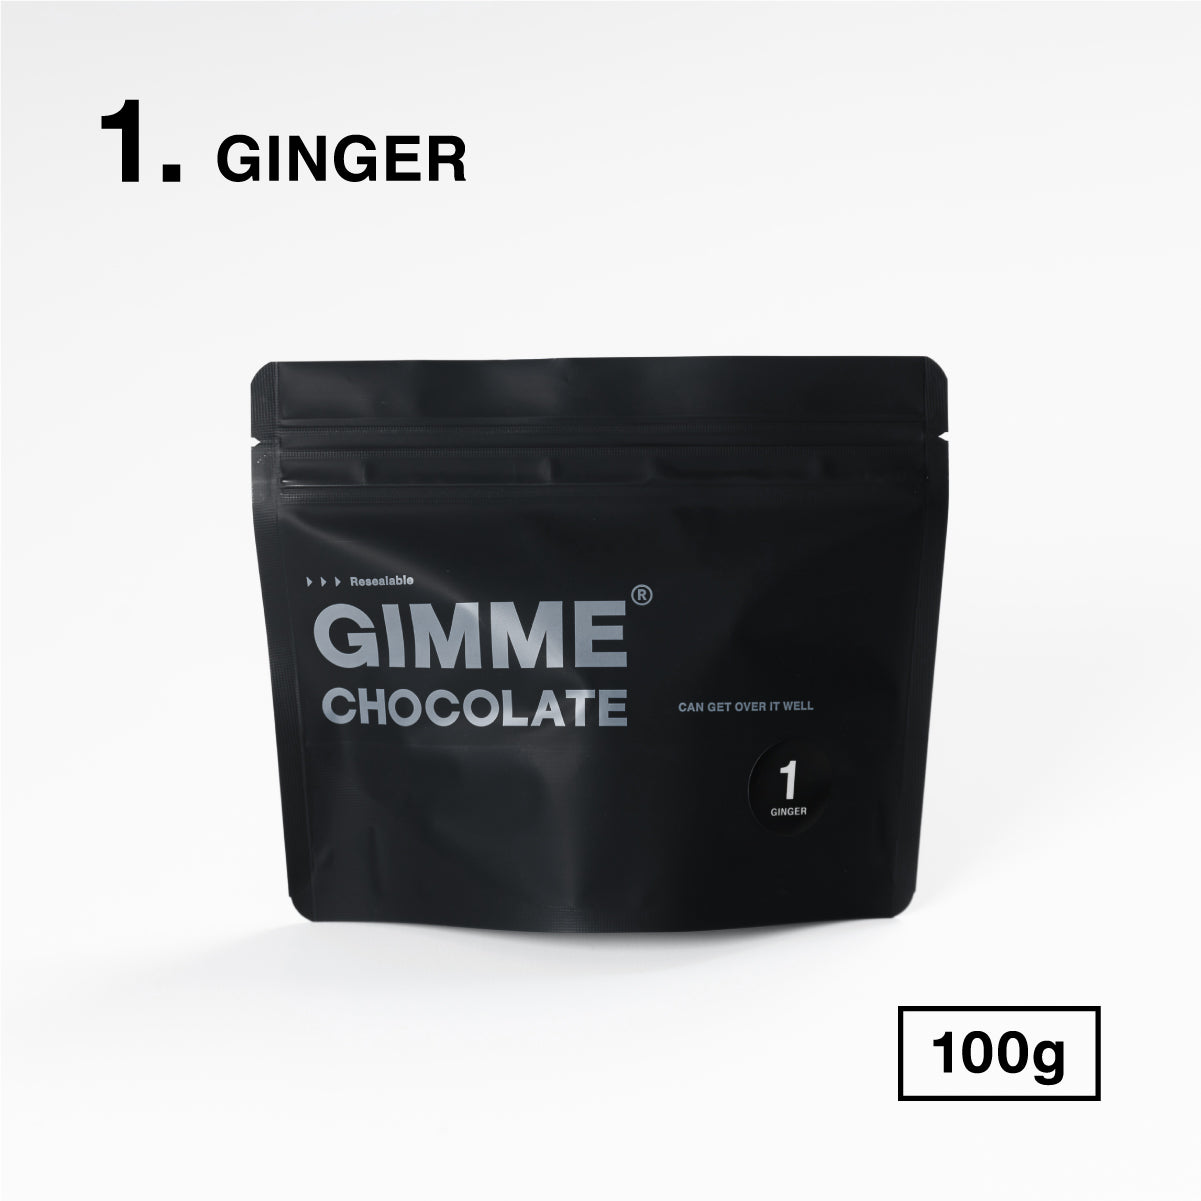 GIMME CHOCOLATE「GINGER」100g